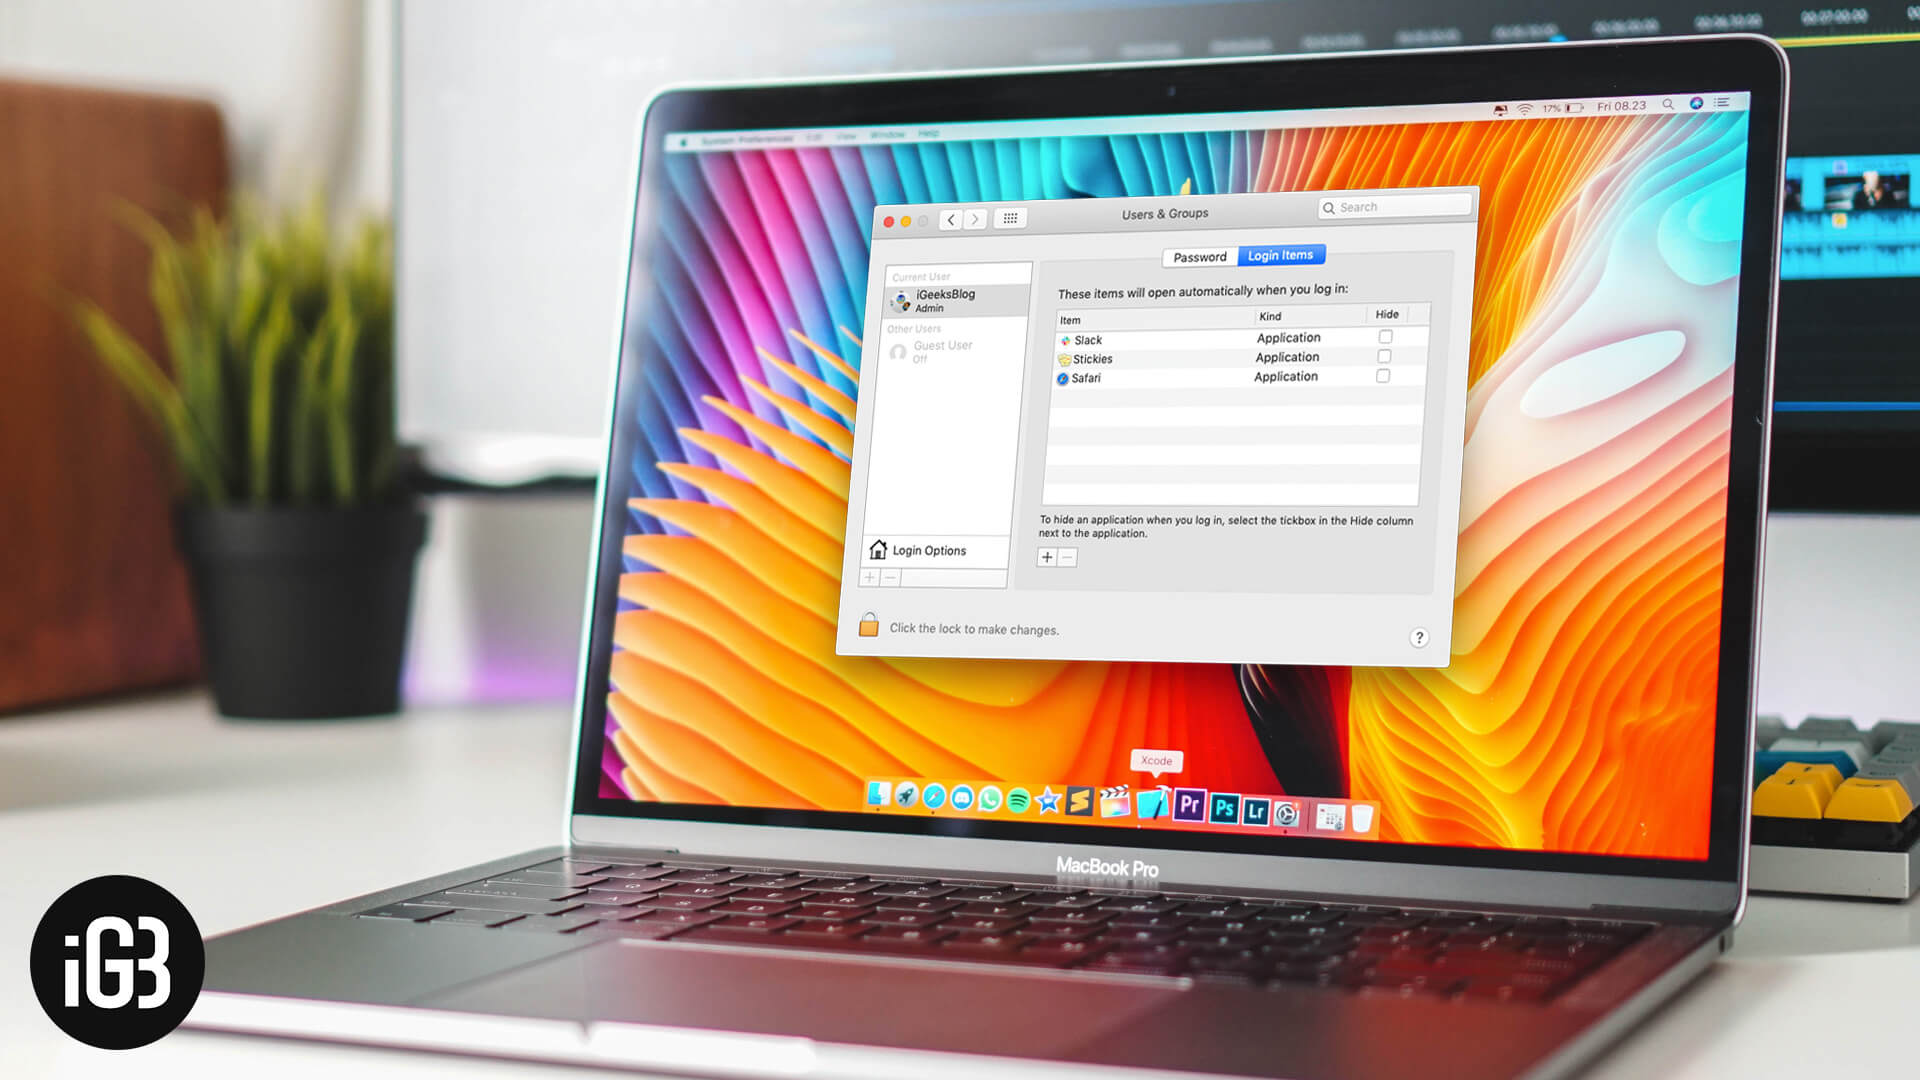 How To Stop App From Auto Start In Mac